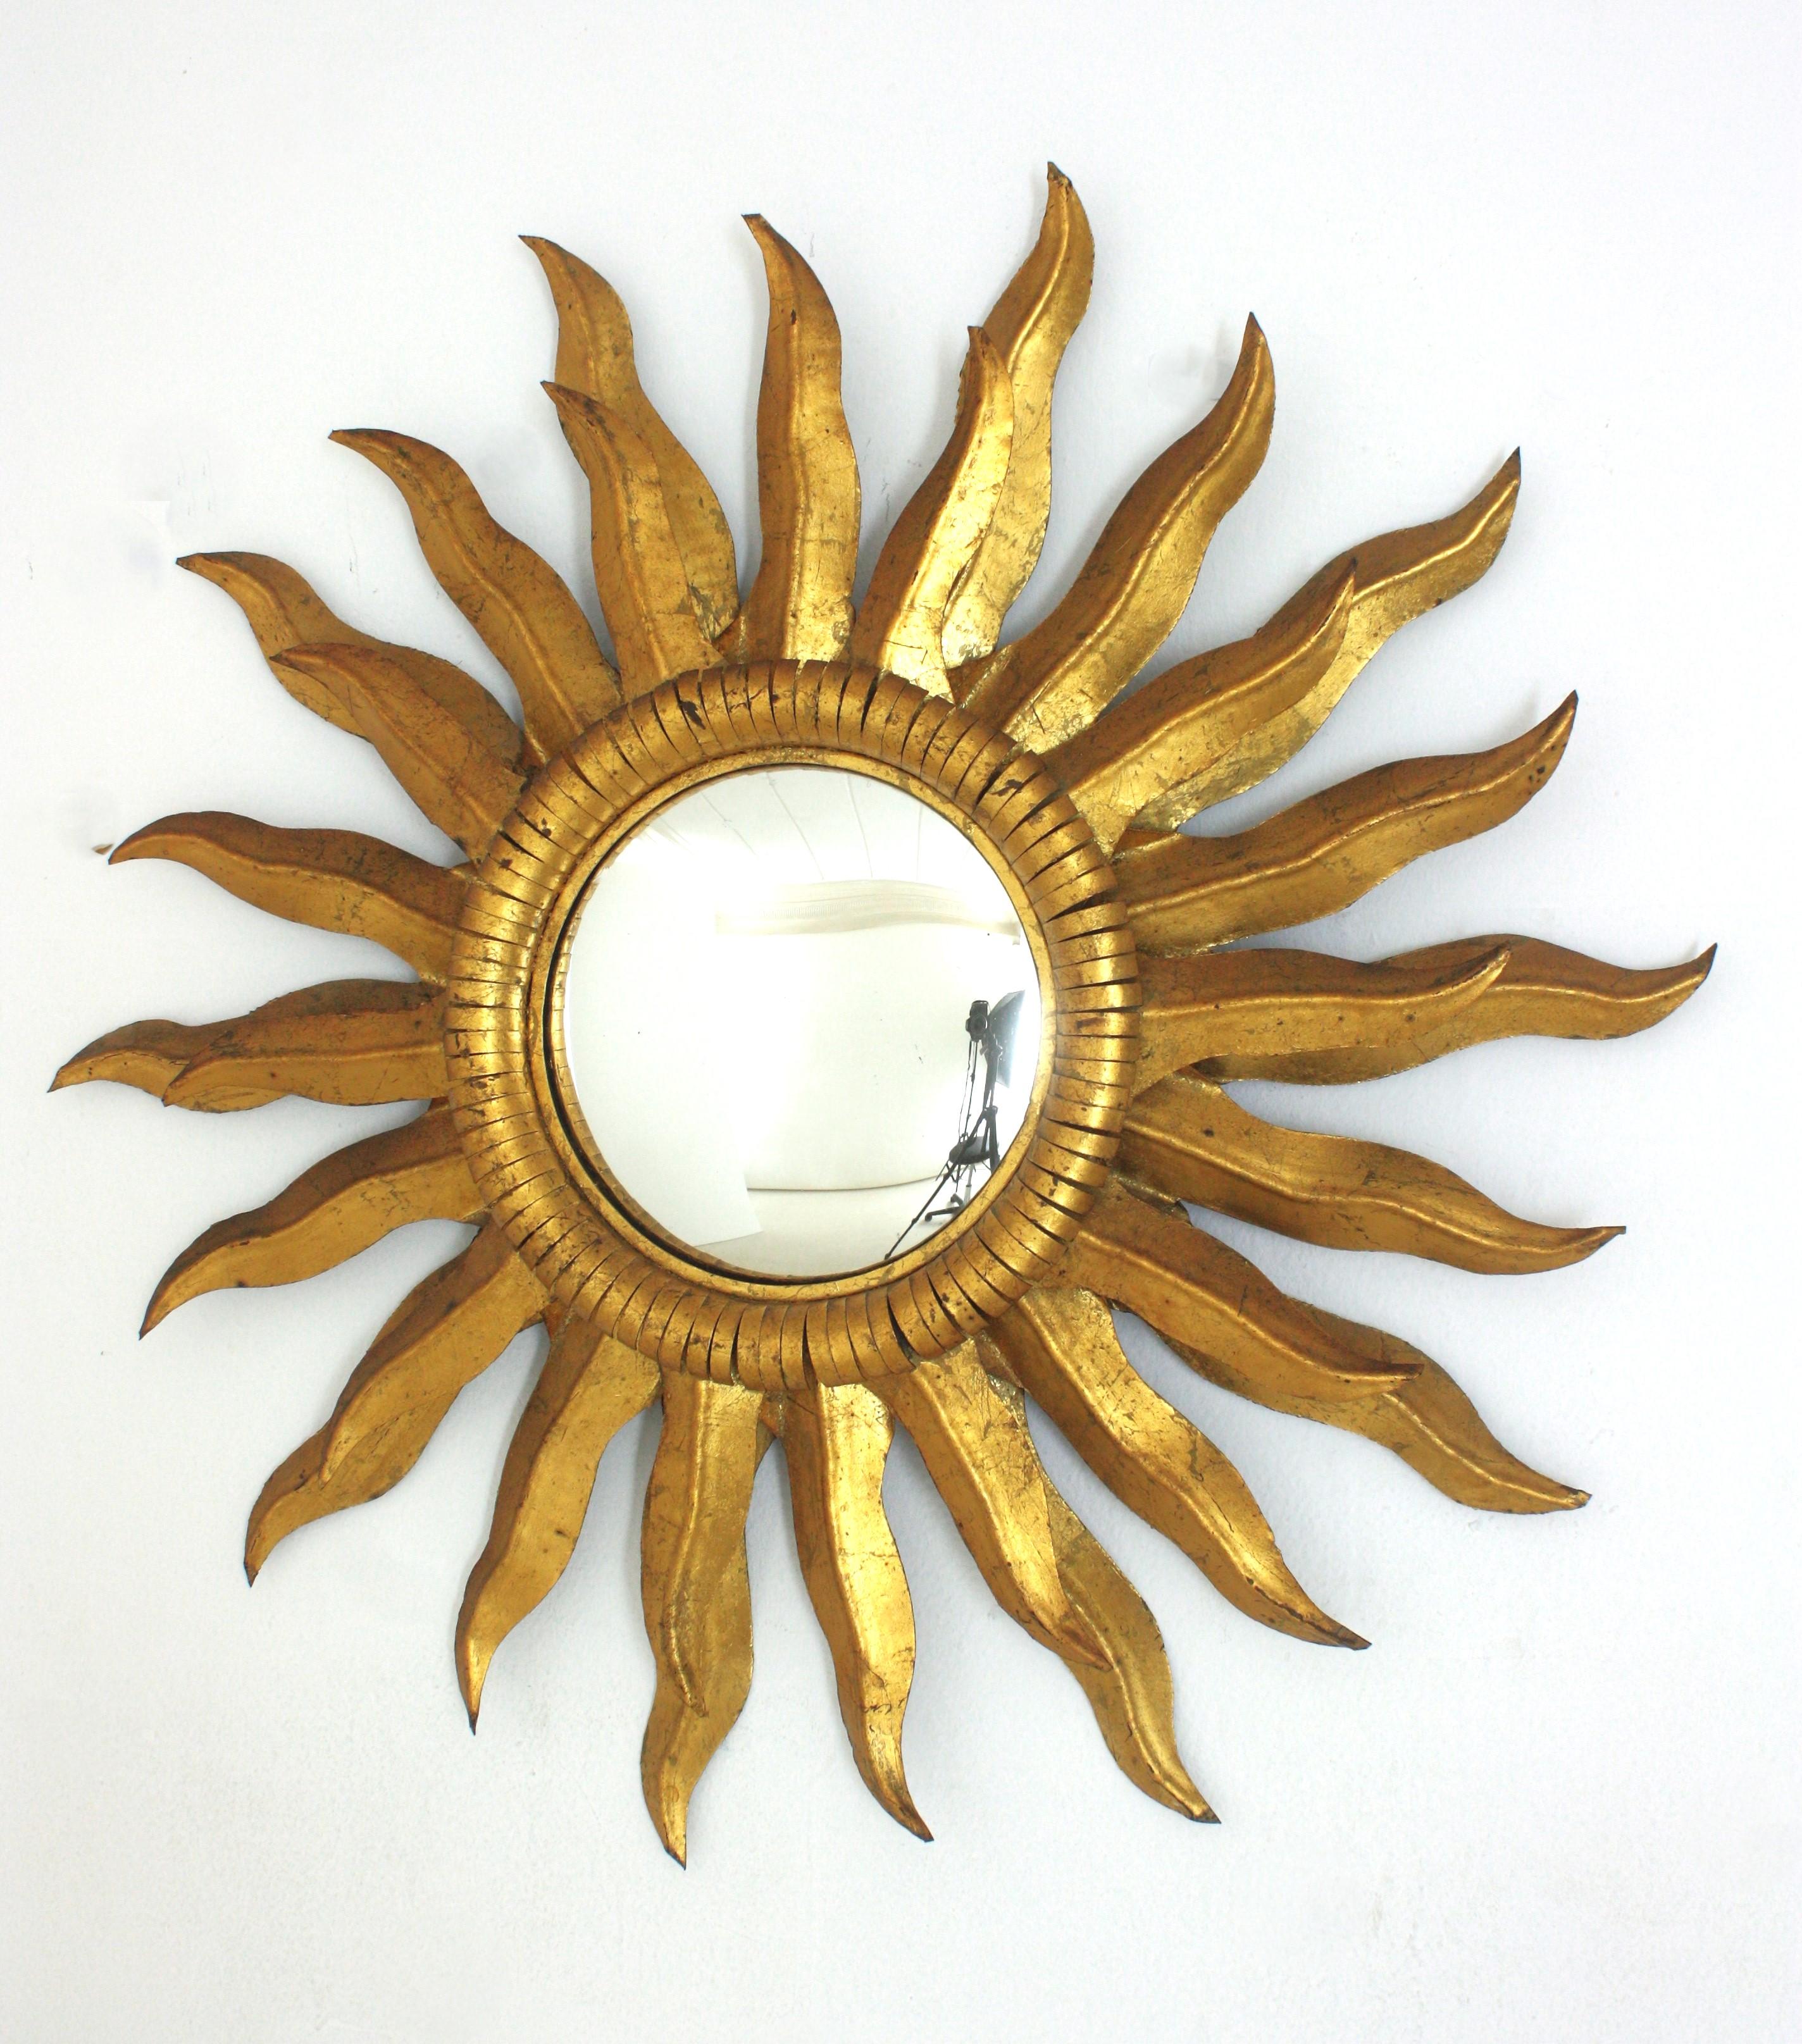 Spanish Double Layered Convex Sunburst Mirror in Gilt Metal, 1950s For Sale 5